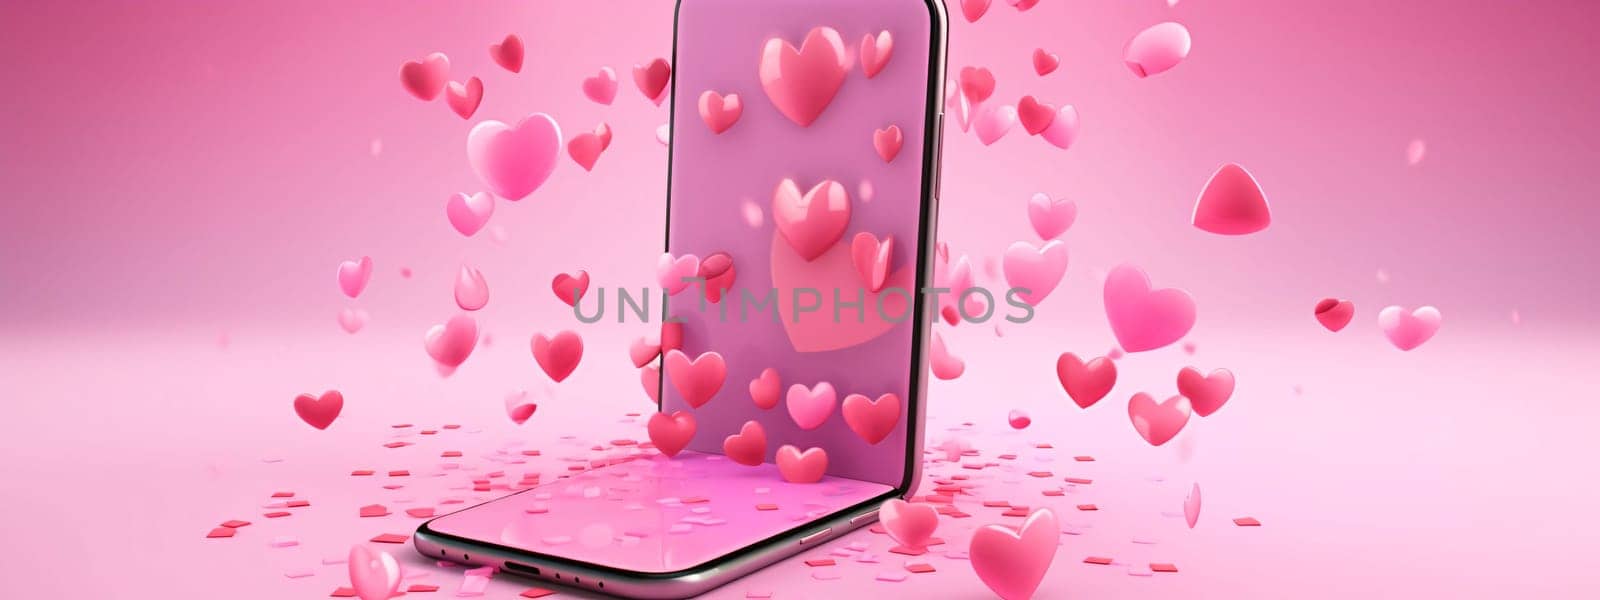 Smartphone with Floating Hearts on Pink Background by ThemesS